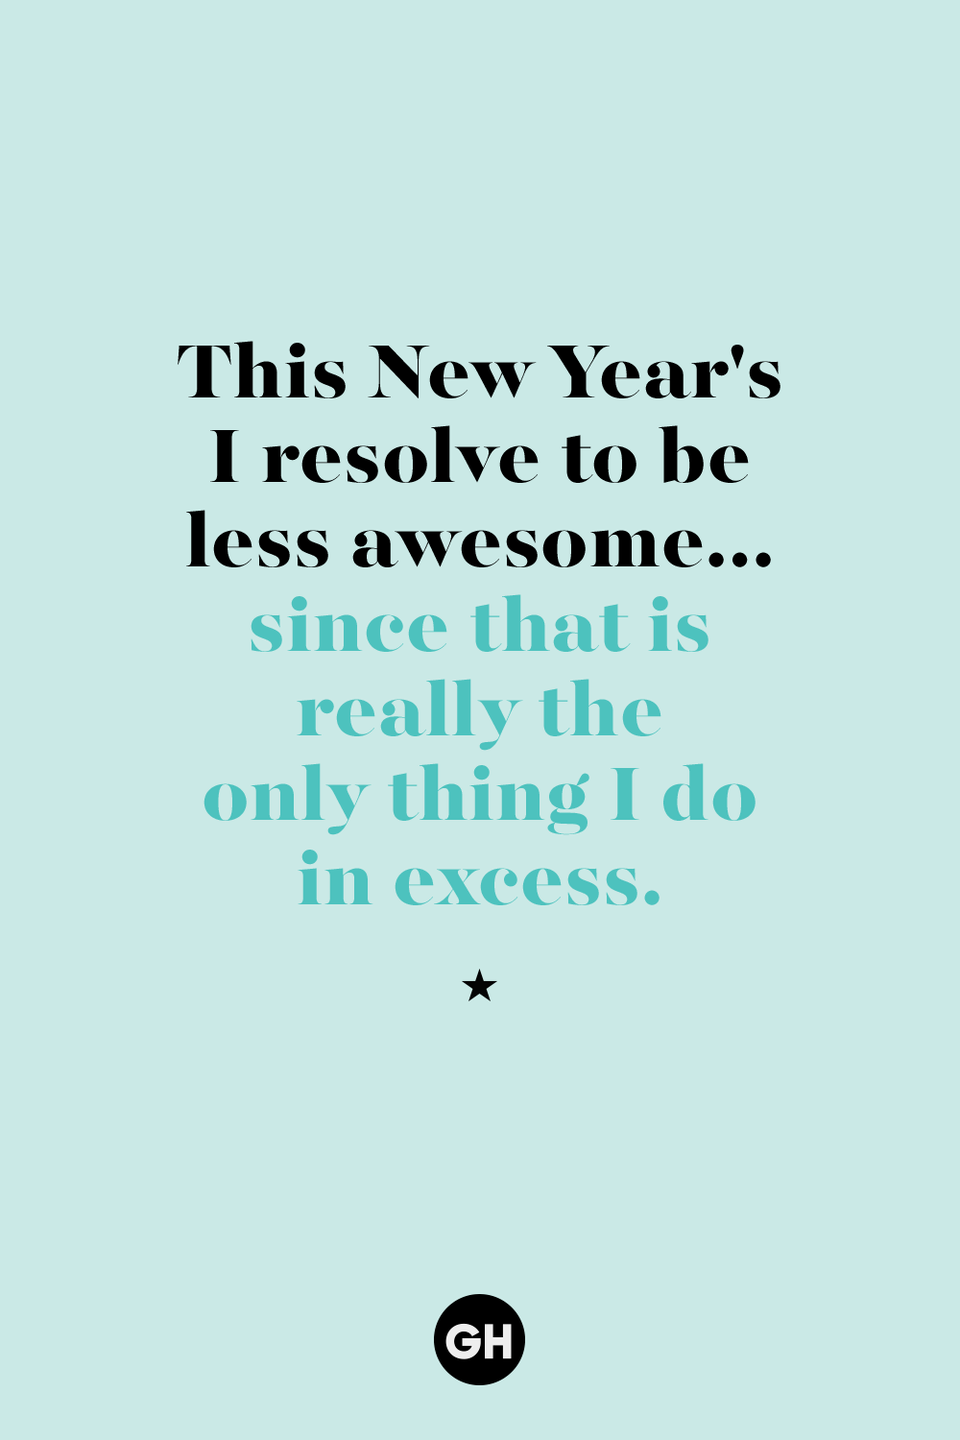 this new year i resolve to be less awsome since that's really the only thing i do in excess